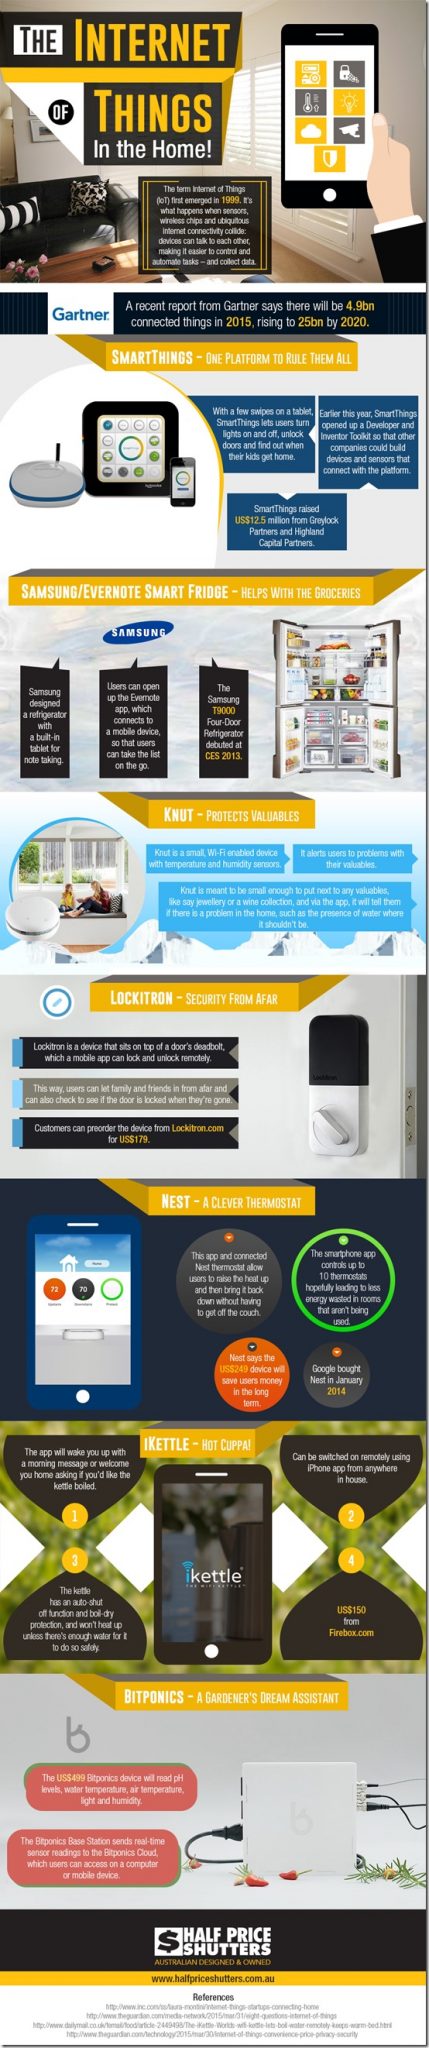 Internet-of-Things-Home-An-Info-graphic